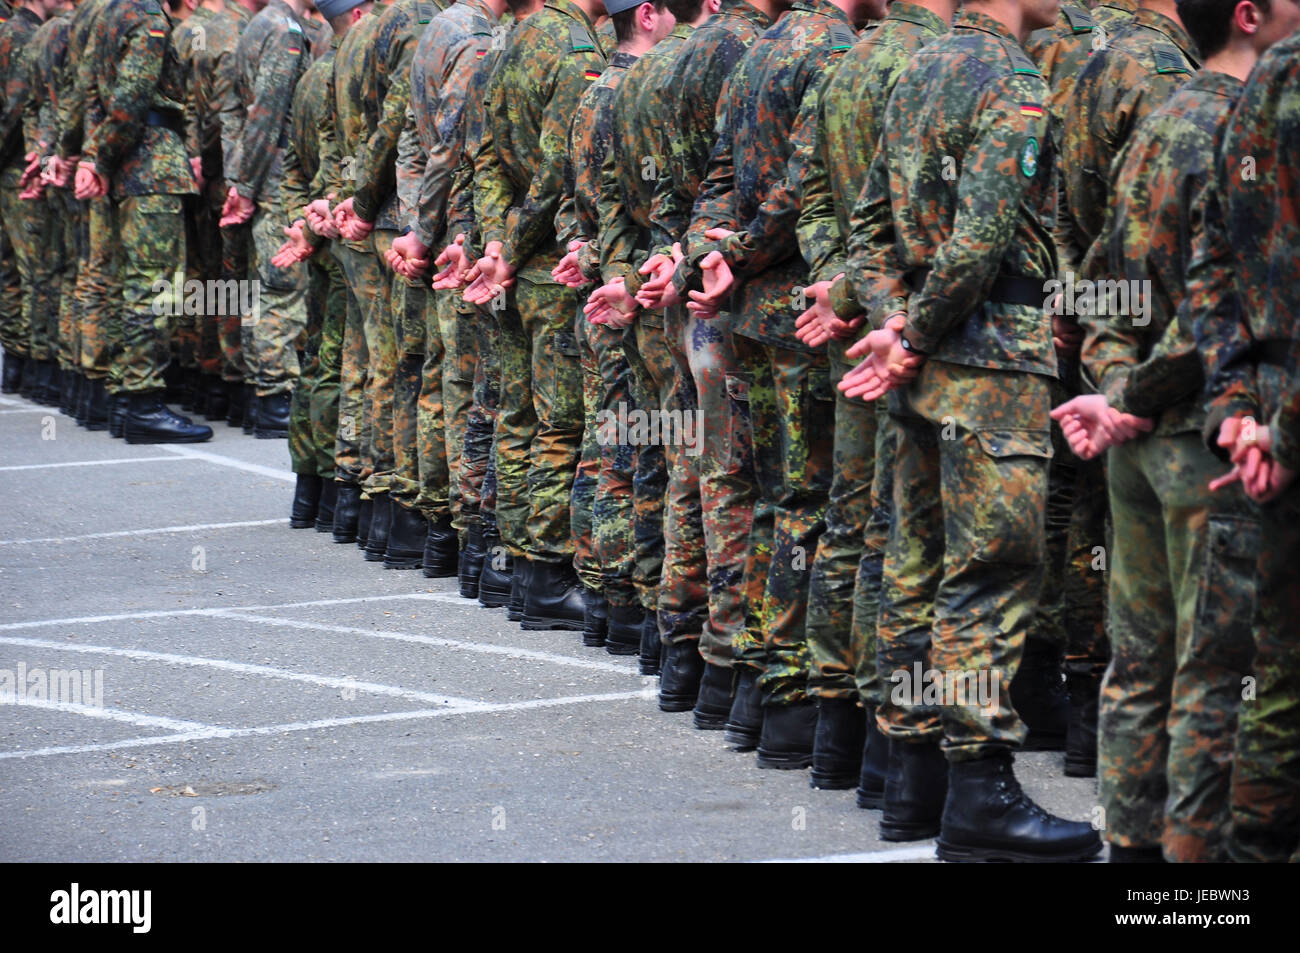 The armed forces, company, soldier, appeal, back view, Stock Photo